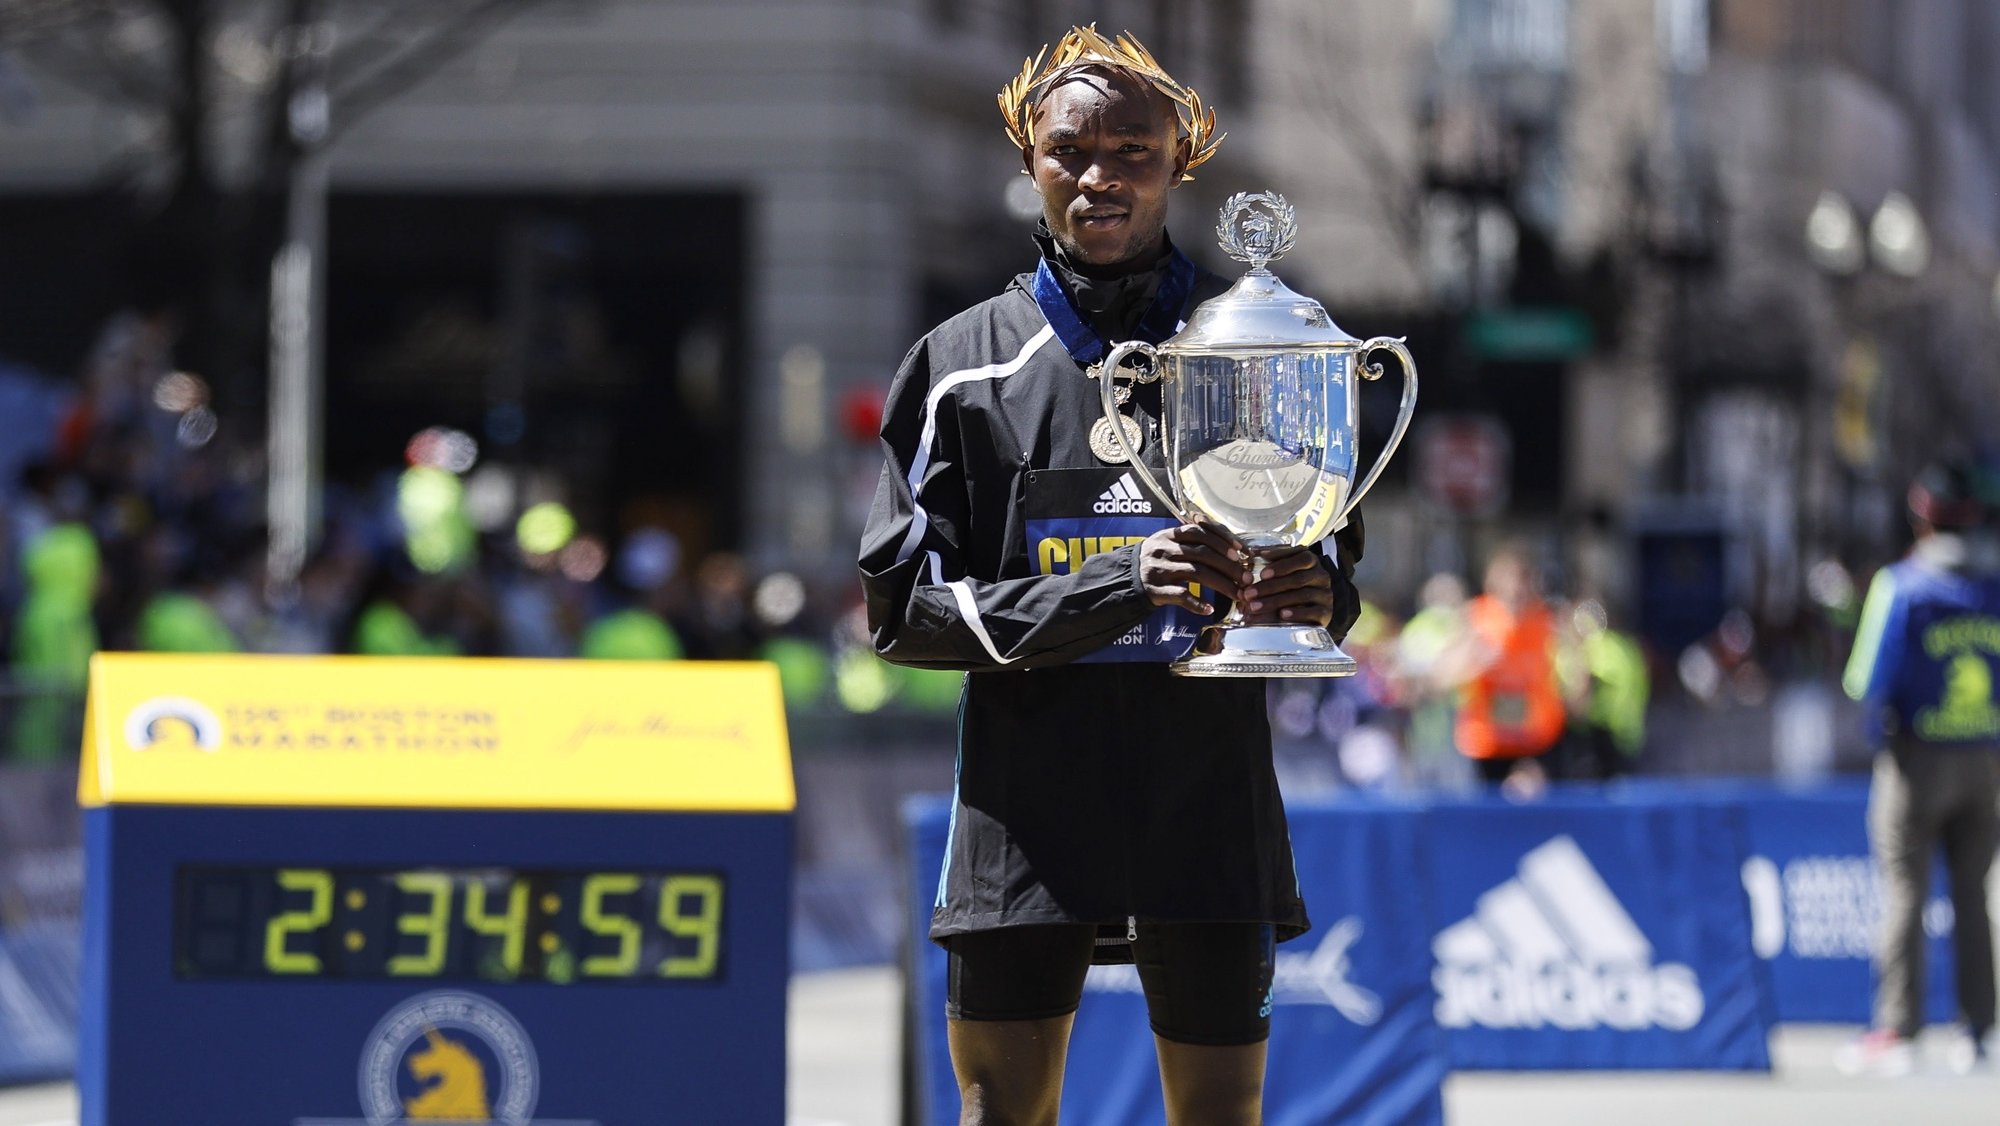 epa09896153 Evans Chebet of Kenya holds up a trophy after winning the Men’s Division of the 126th Boston Marathon, in Boston, Massachusetts, USA, 18 April 2022. This is the first time since the beginning of the pandemic that the Boston Marathon, the worlds oldest annual marathon, was held on the traditional date in April.  EPA/CJ GUNTHER